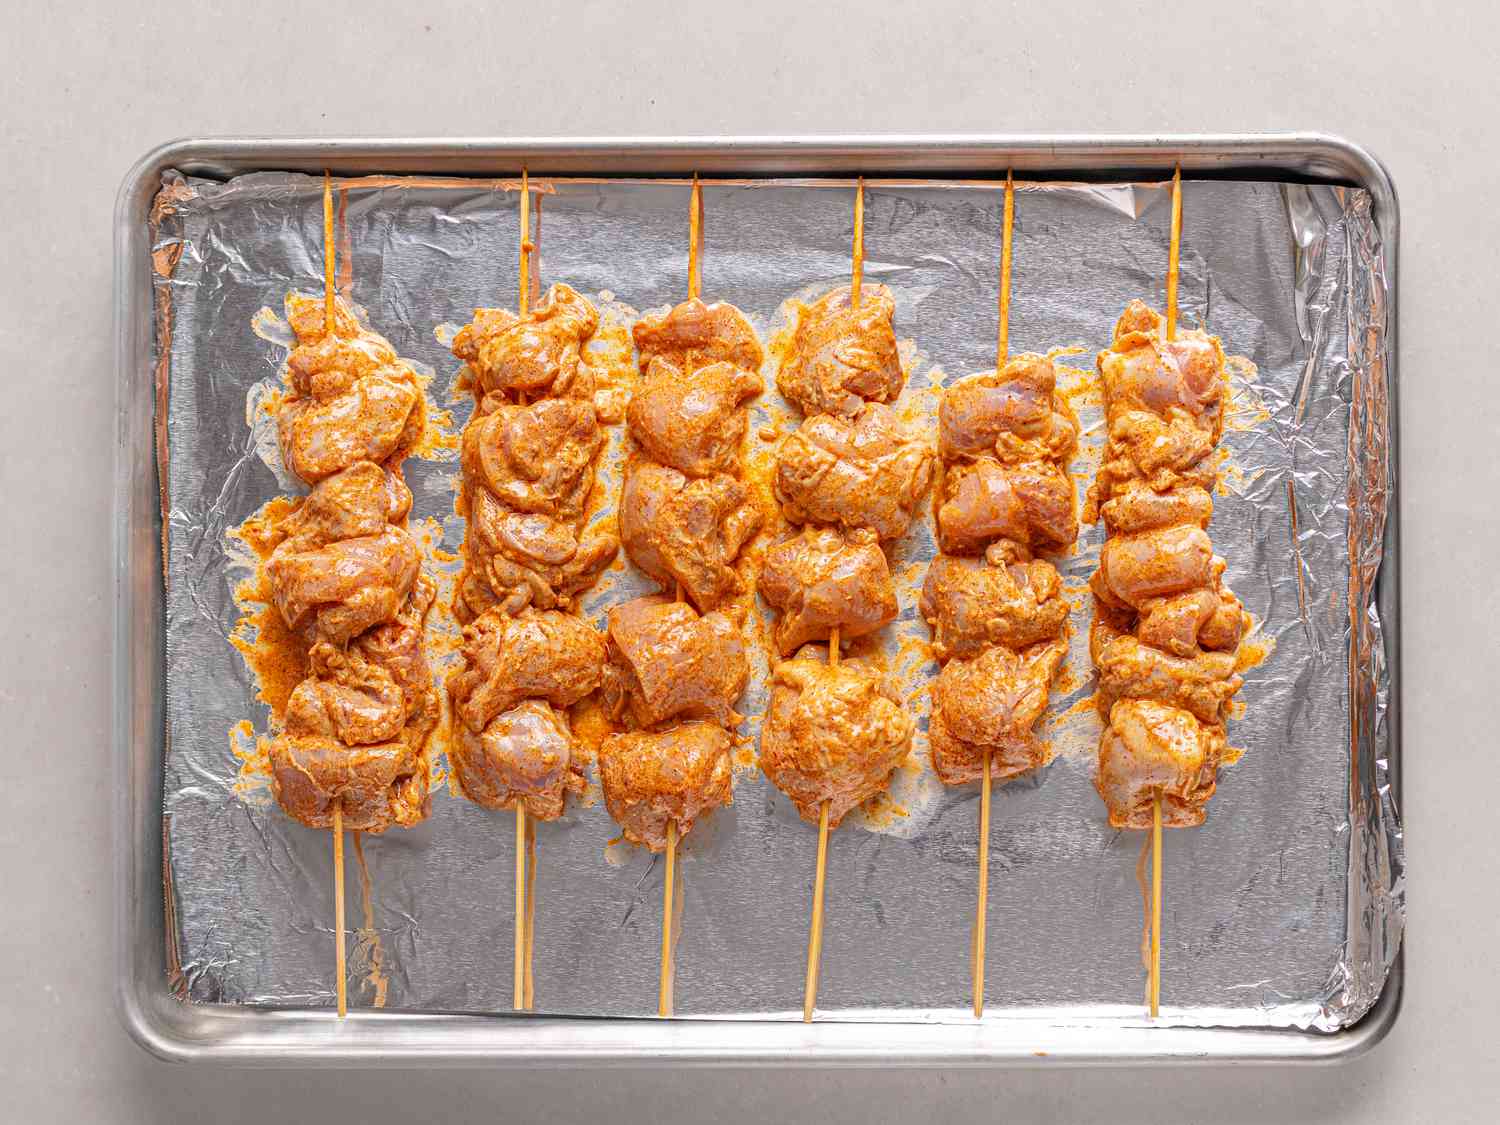 Overhead view of chicken threaded on skewers